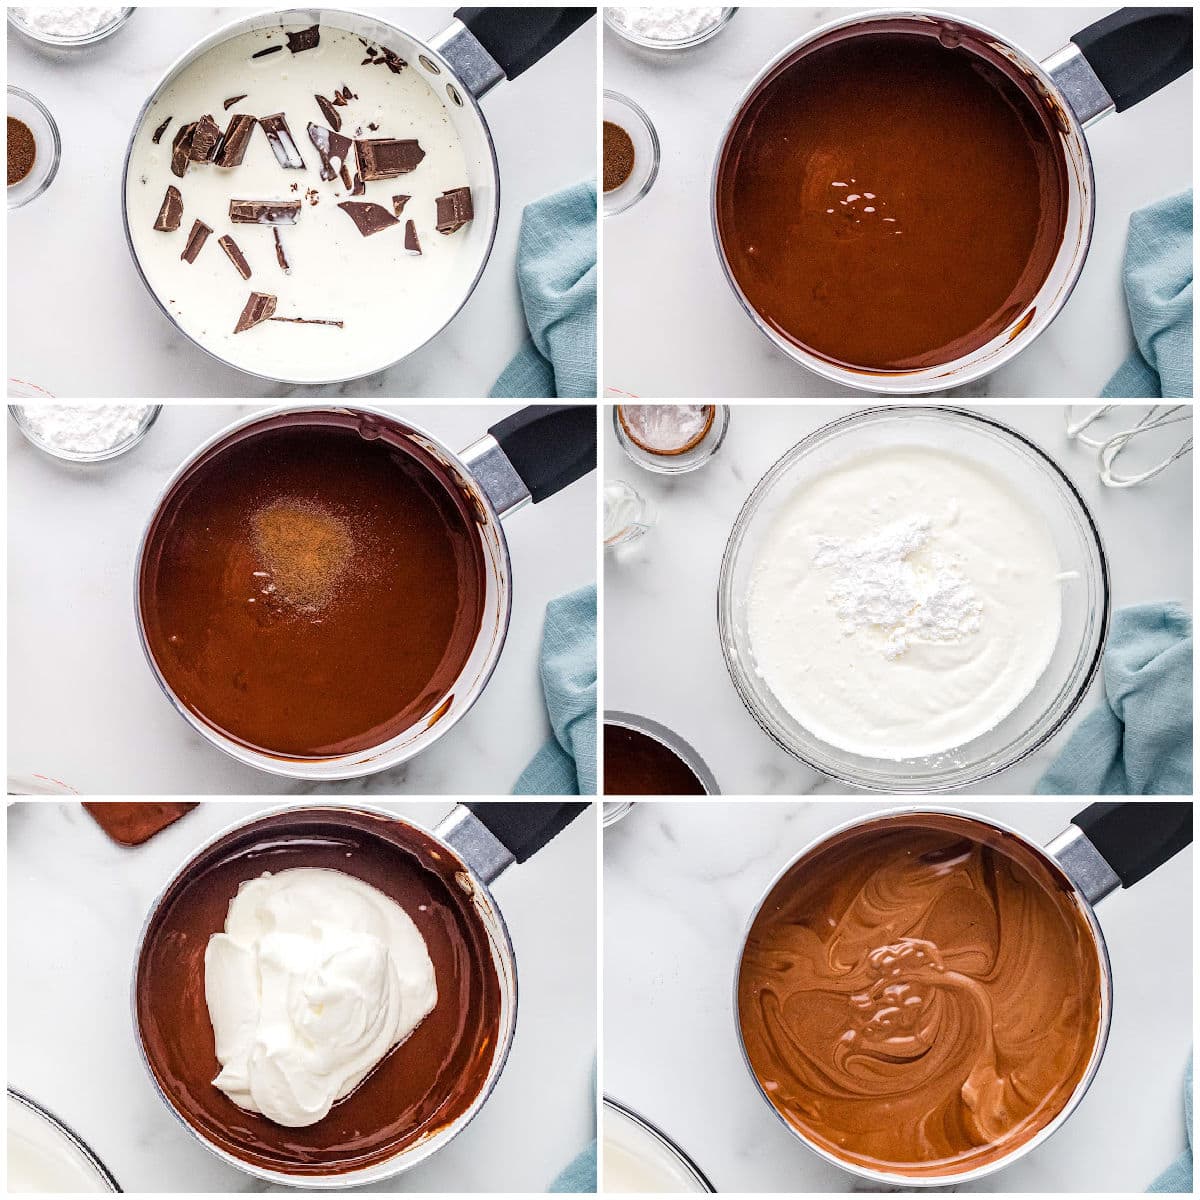 six image collage showing how to make easy chocolate mousse.